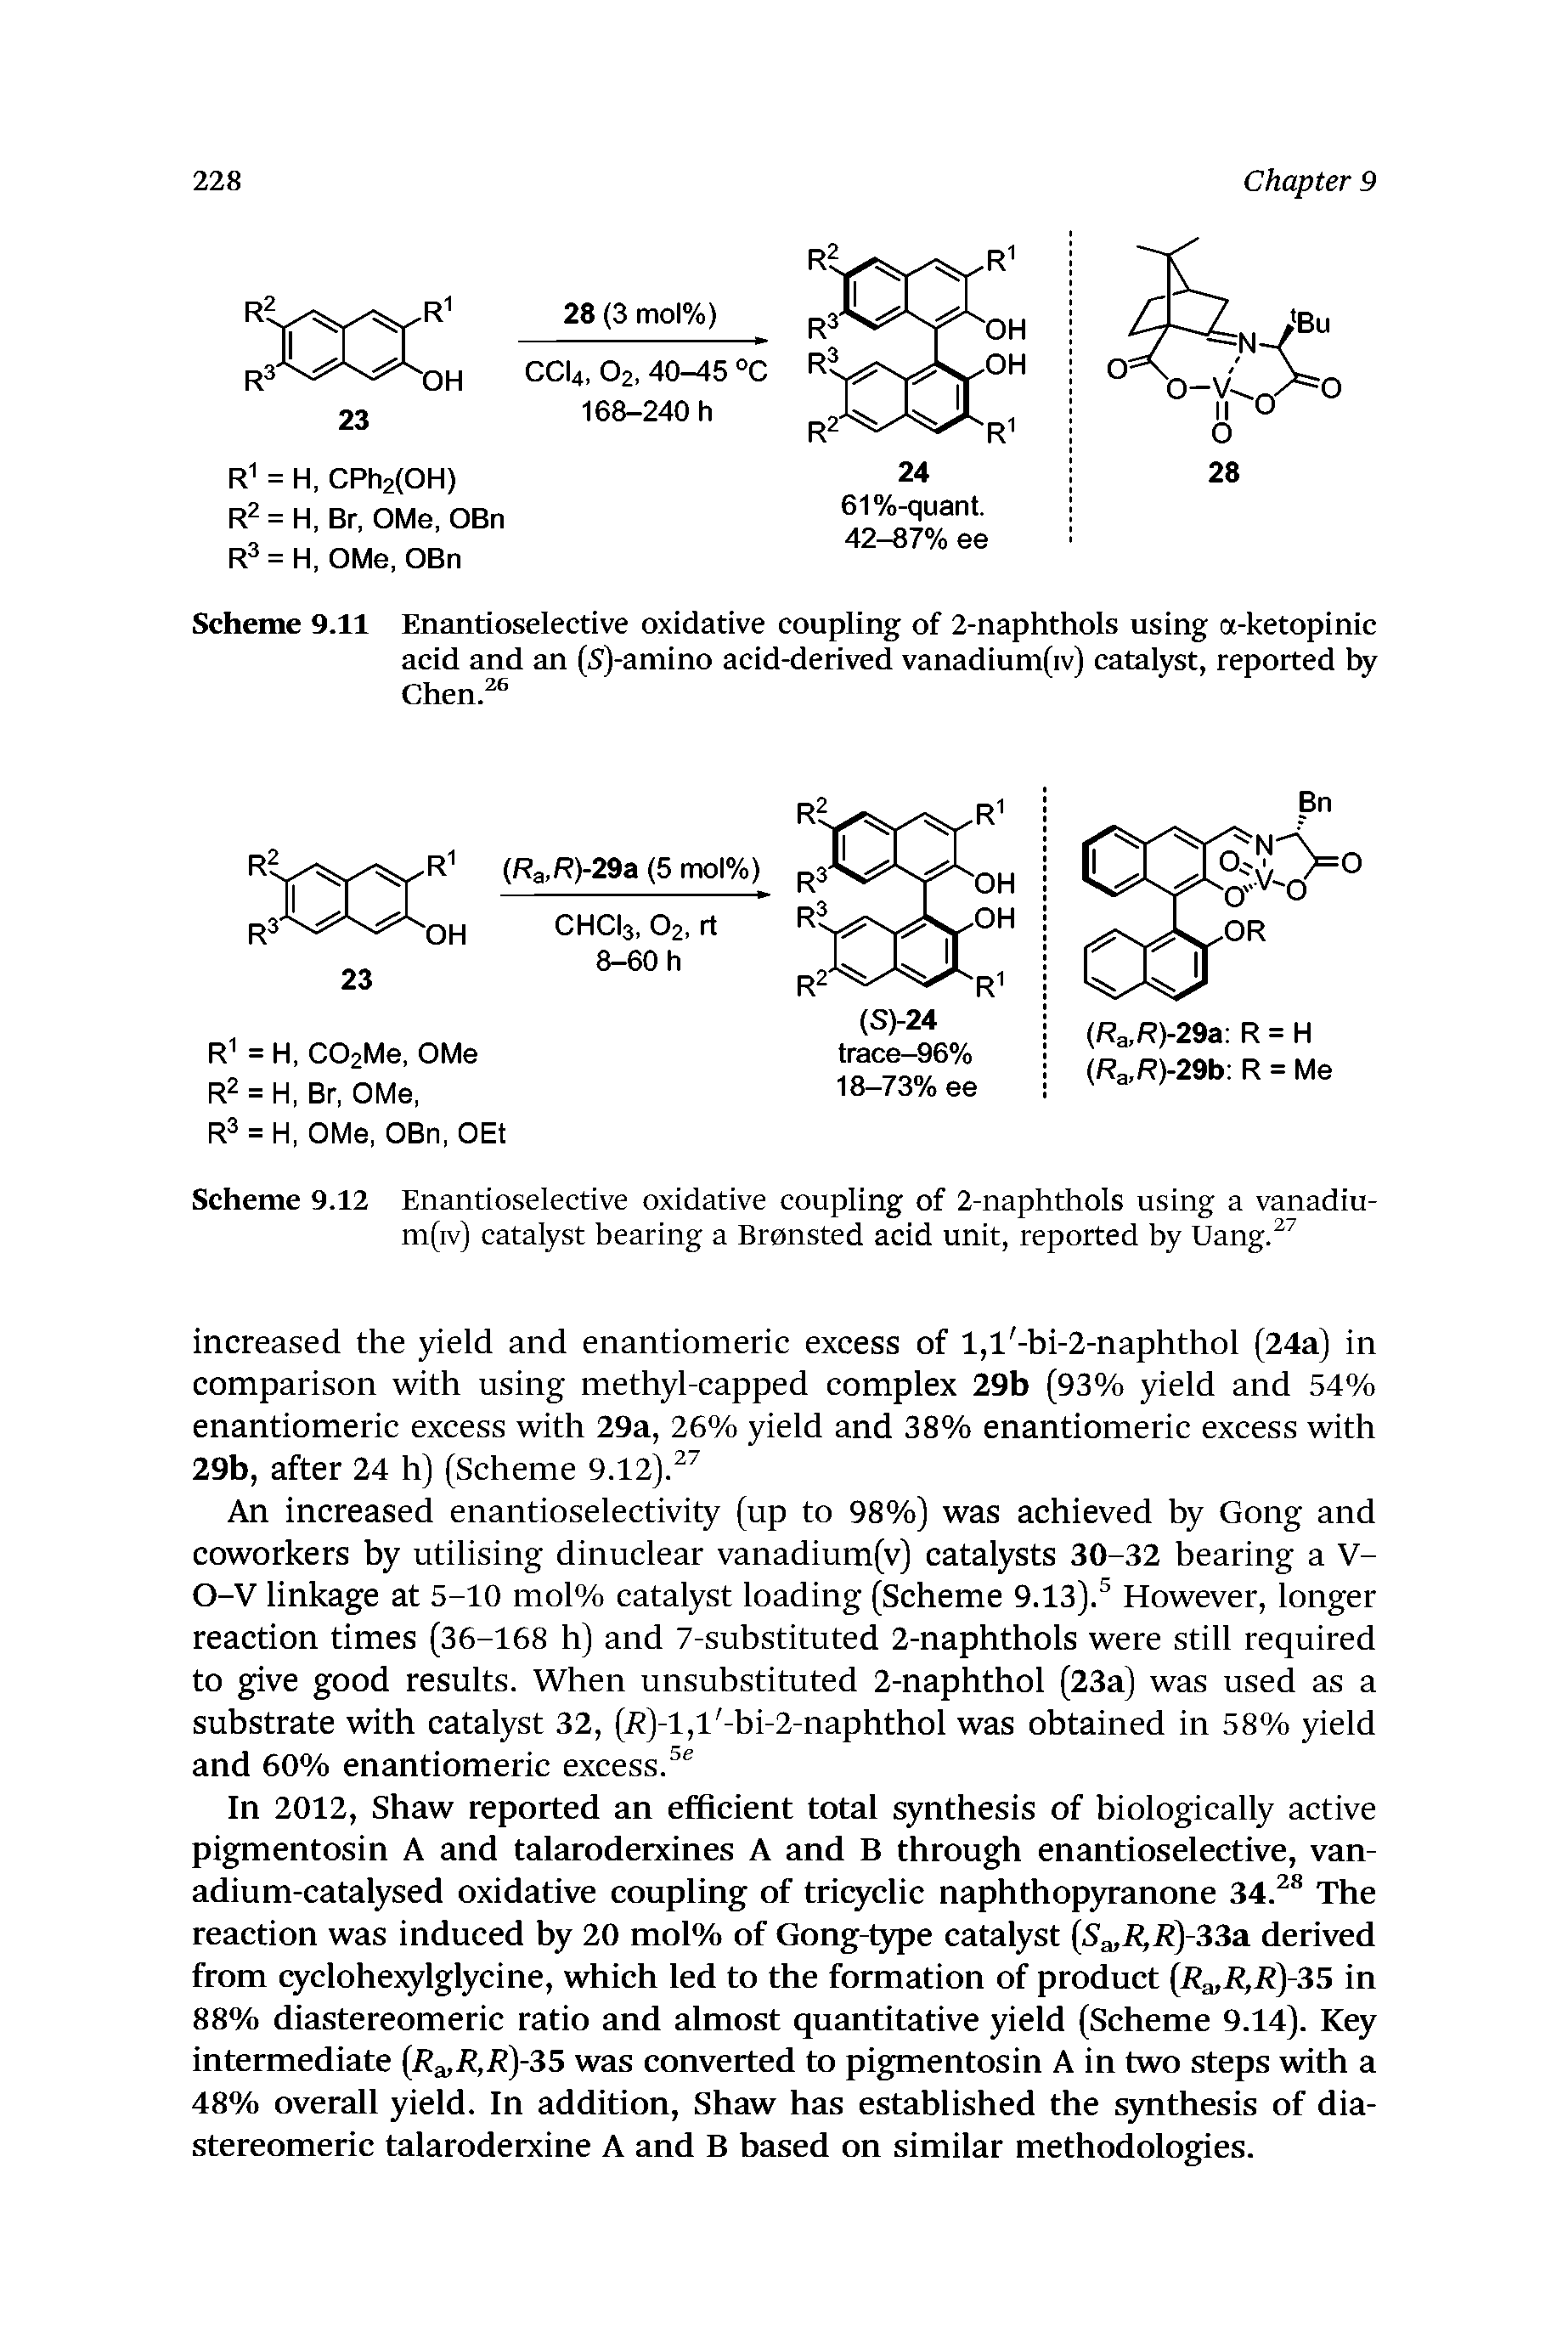 Scheme 9.11 Enantioselective oxidative coupling of 2-naphthols using a-ketopinic acid and an (S)-amino acid-derived vanadium(iv) catalyst, reported ly Chen. ...